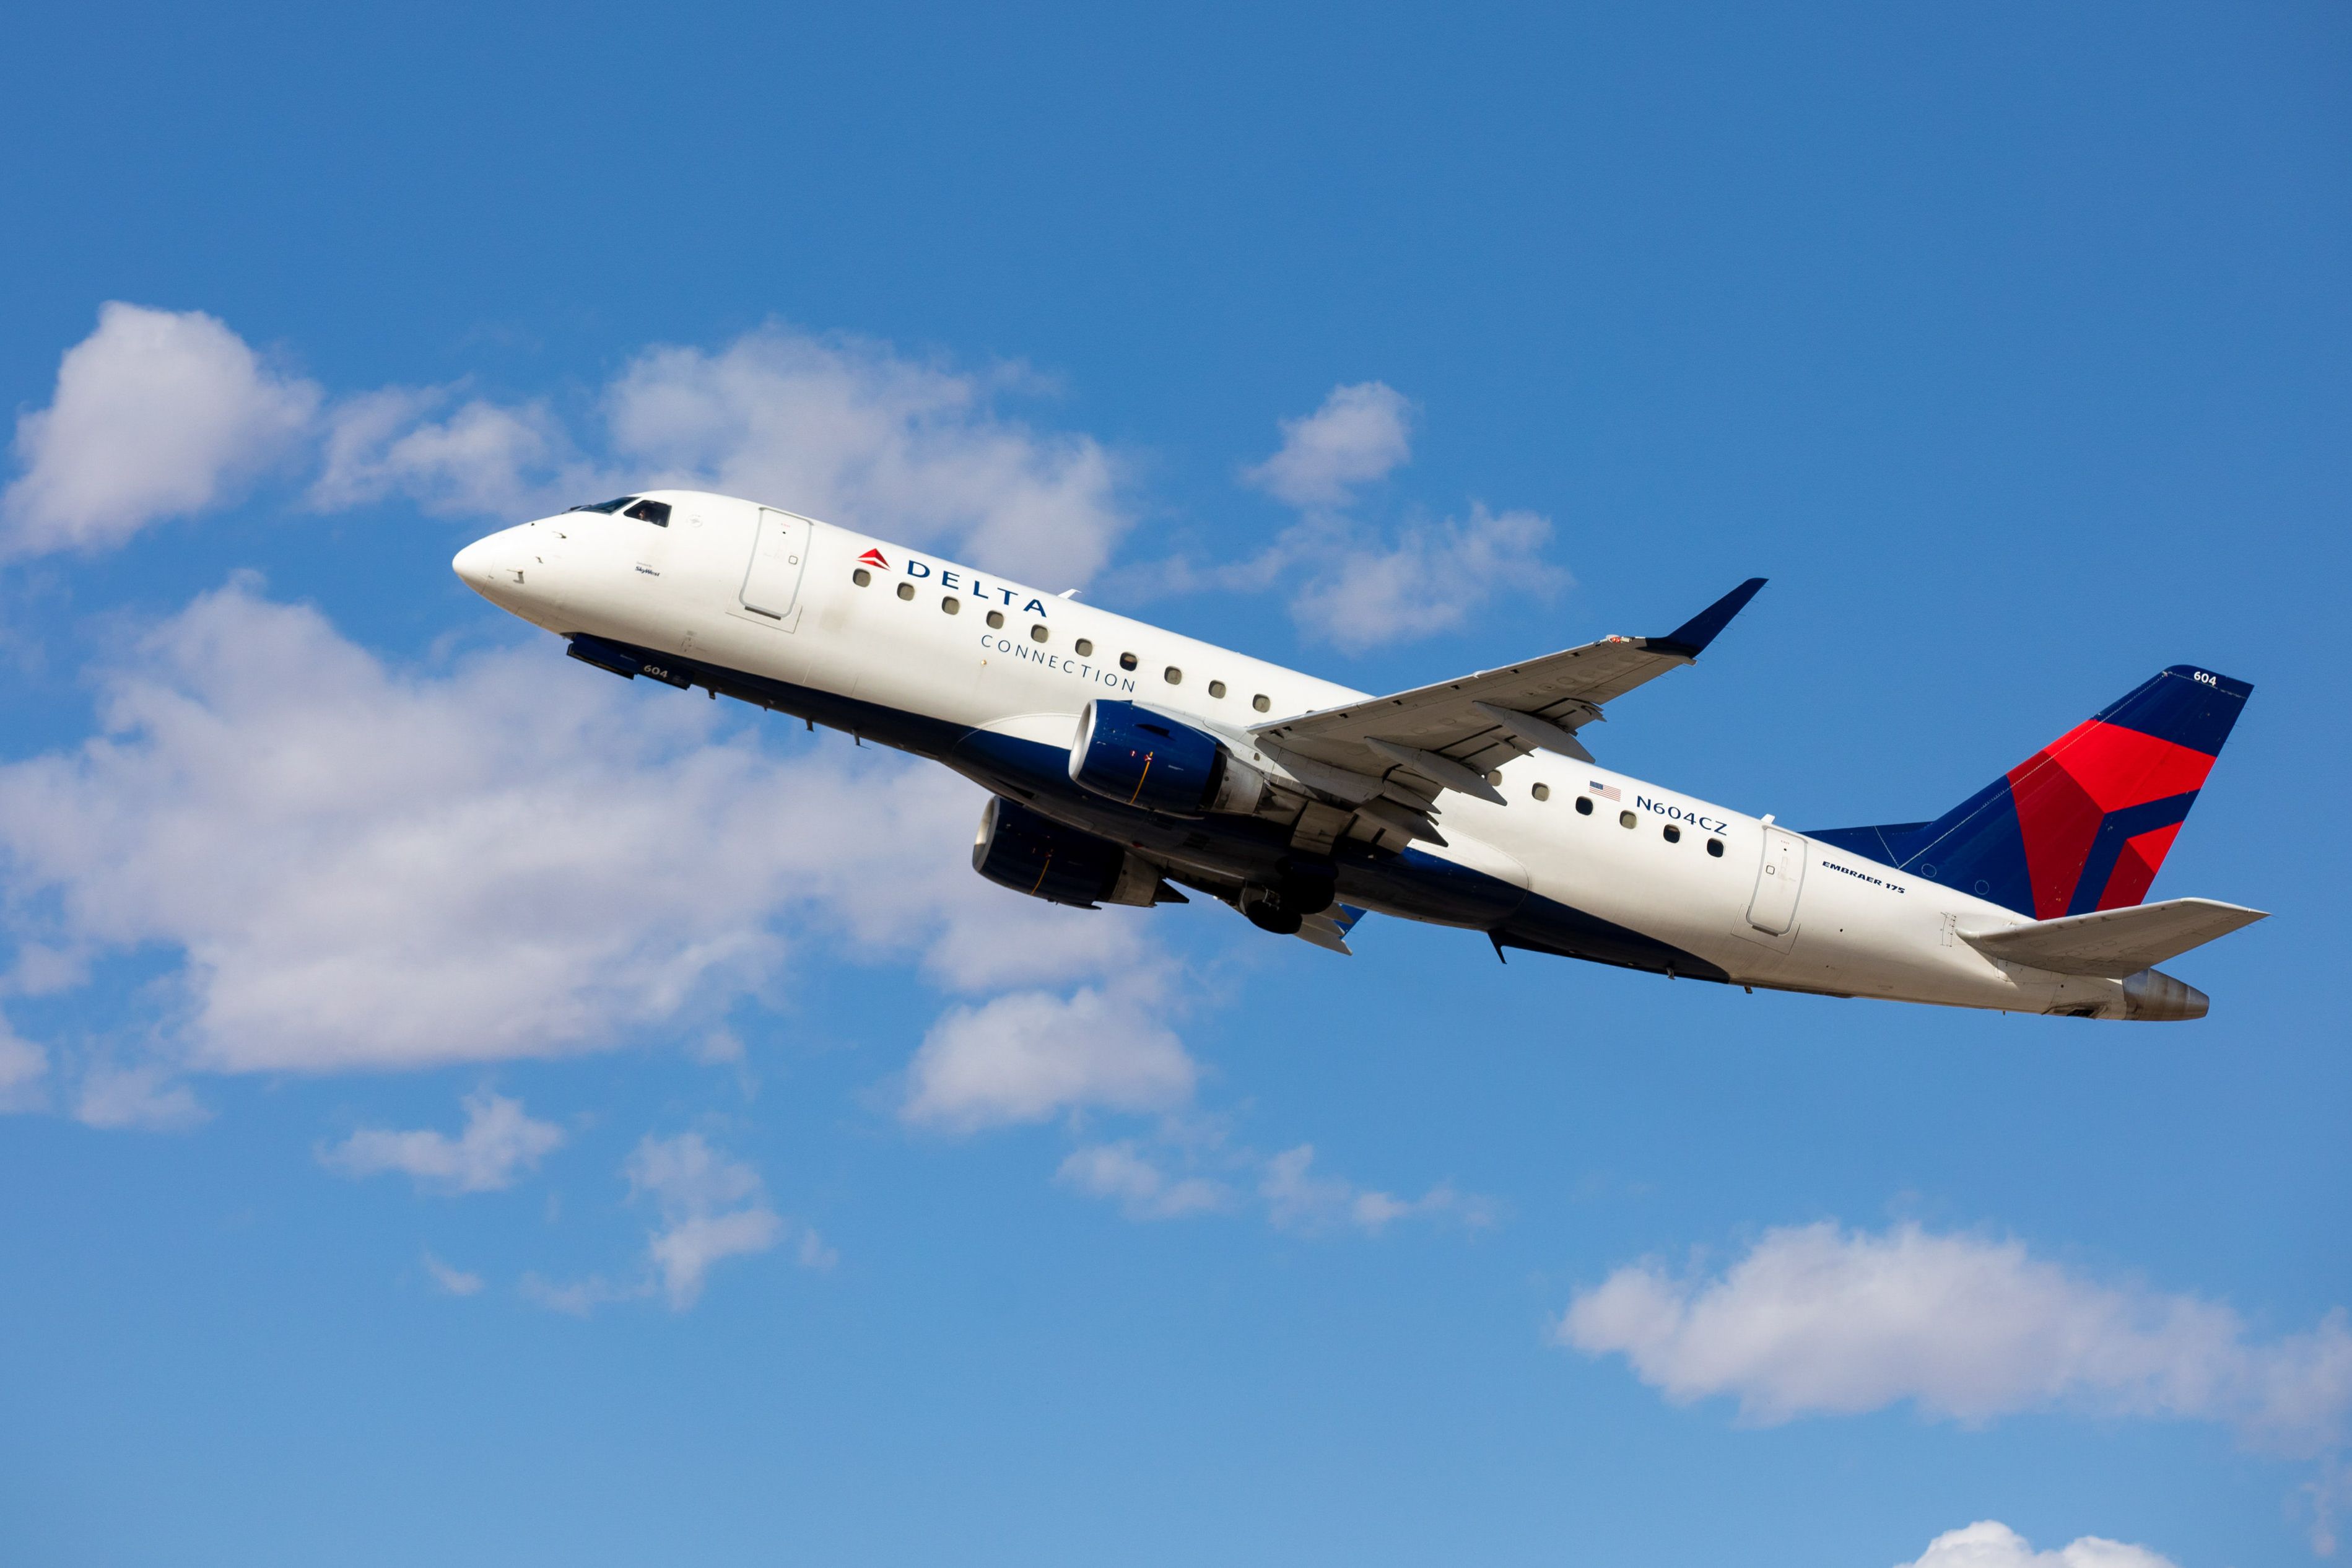 Delta Airlines Embraer E175 taking off from DEN